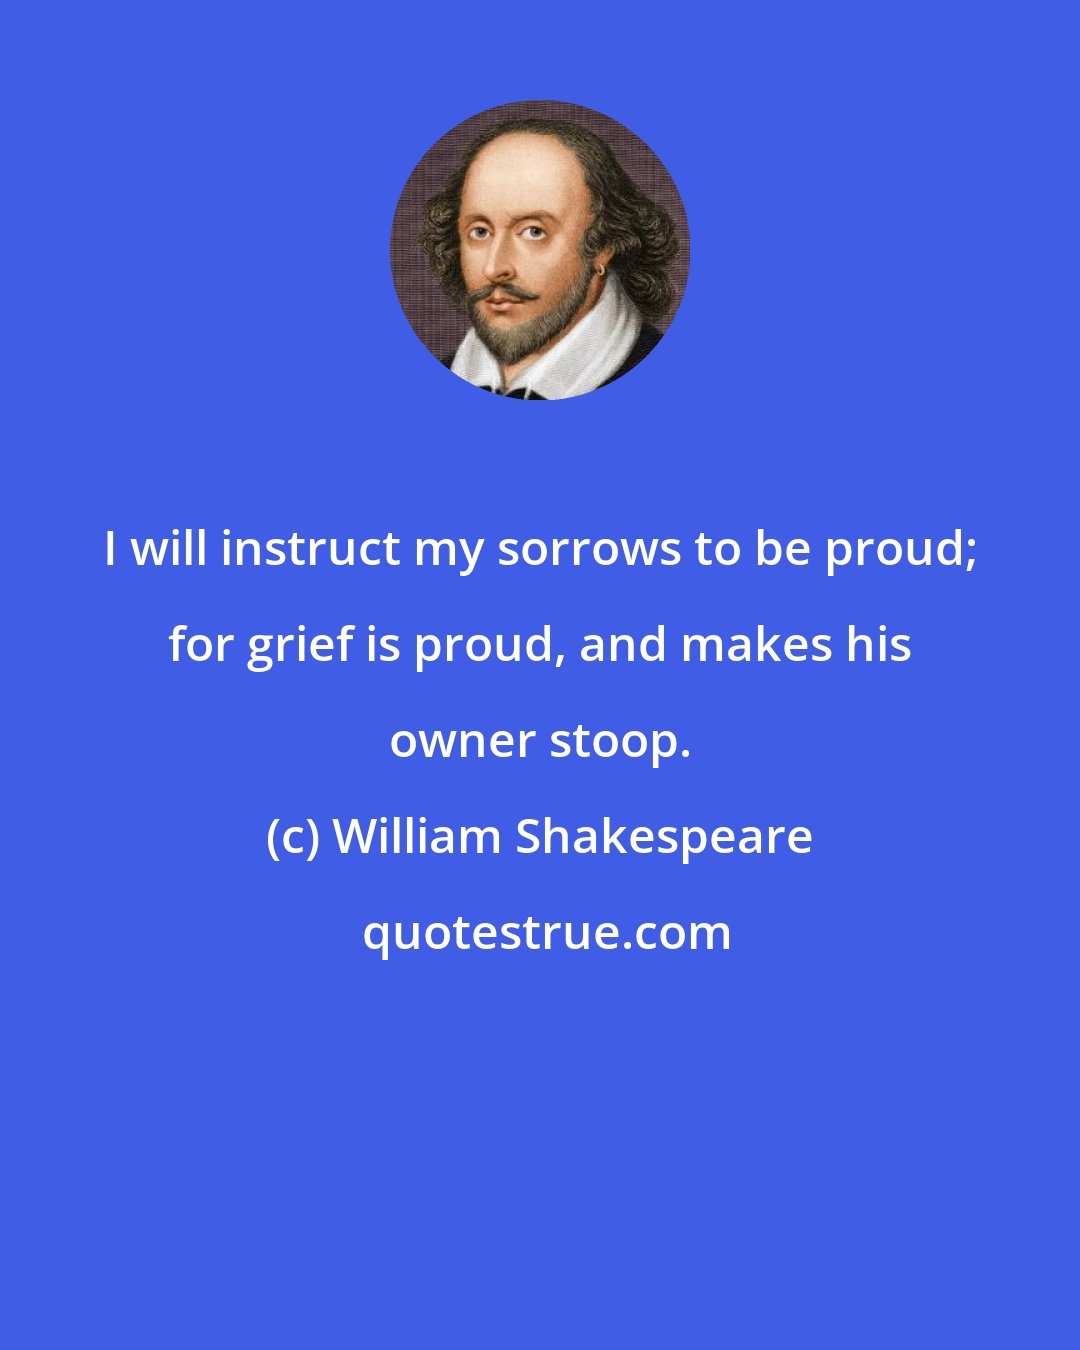 William Shakespeare: I will instruct my sorrows to be proud; for grief is proud, and makes his owner stoop.